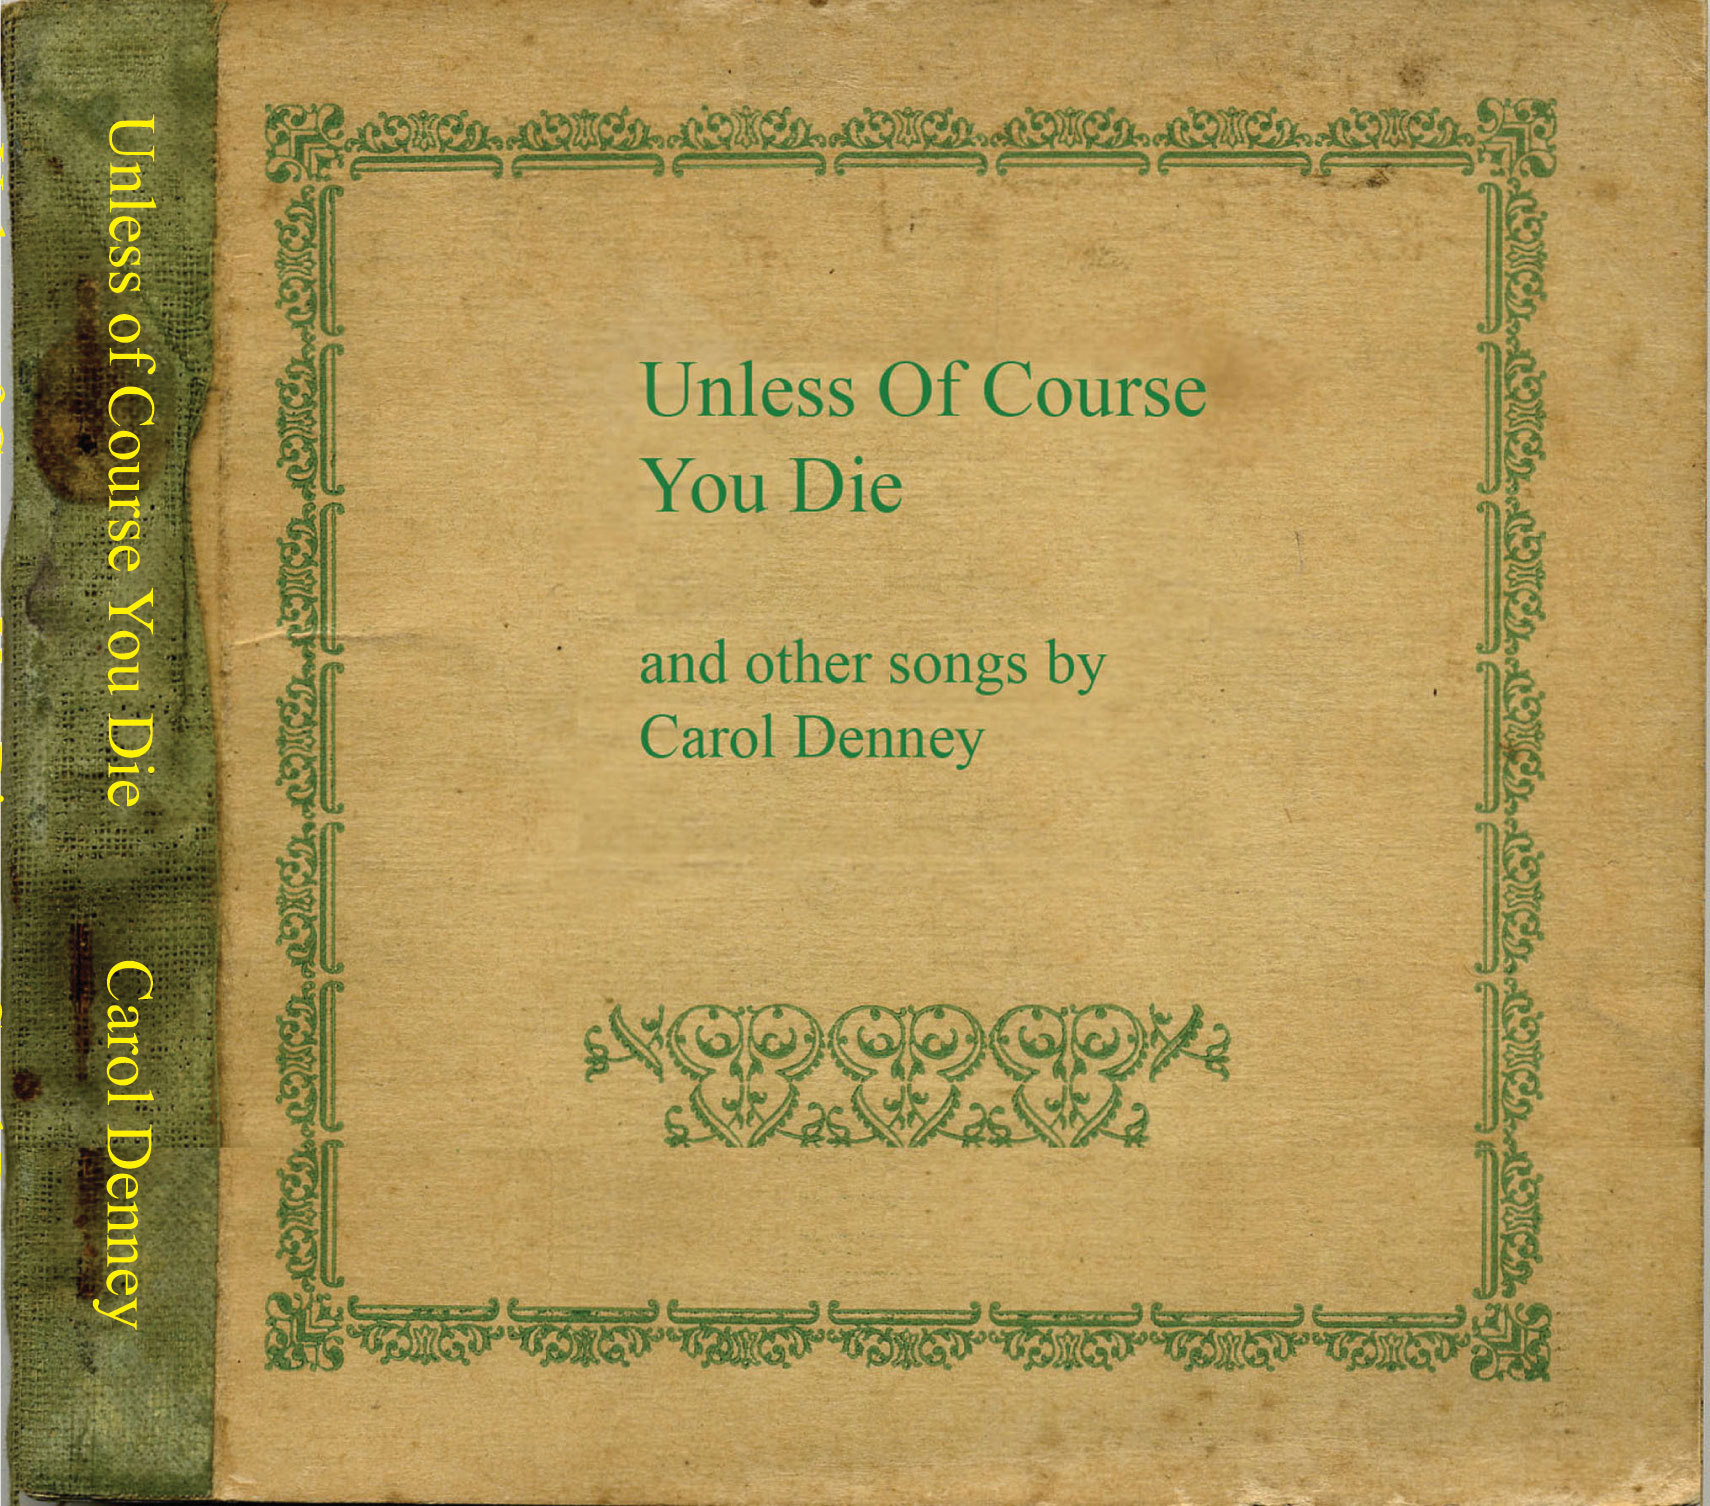 Unless Of Course You Die - the very latest recording.